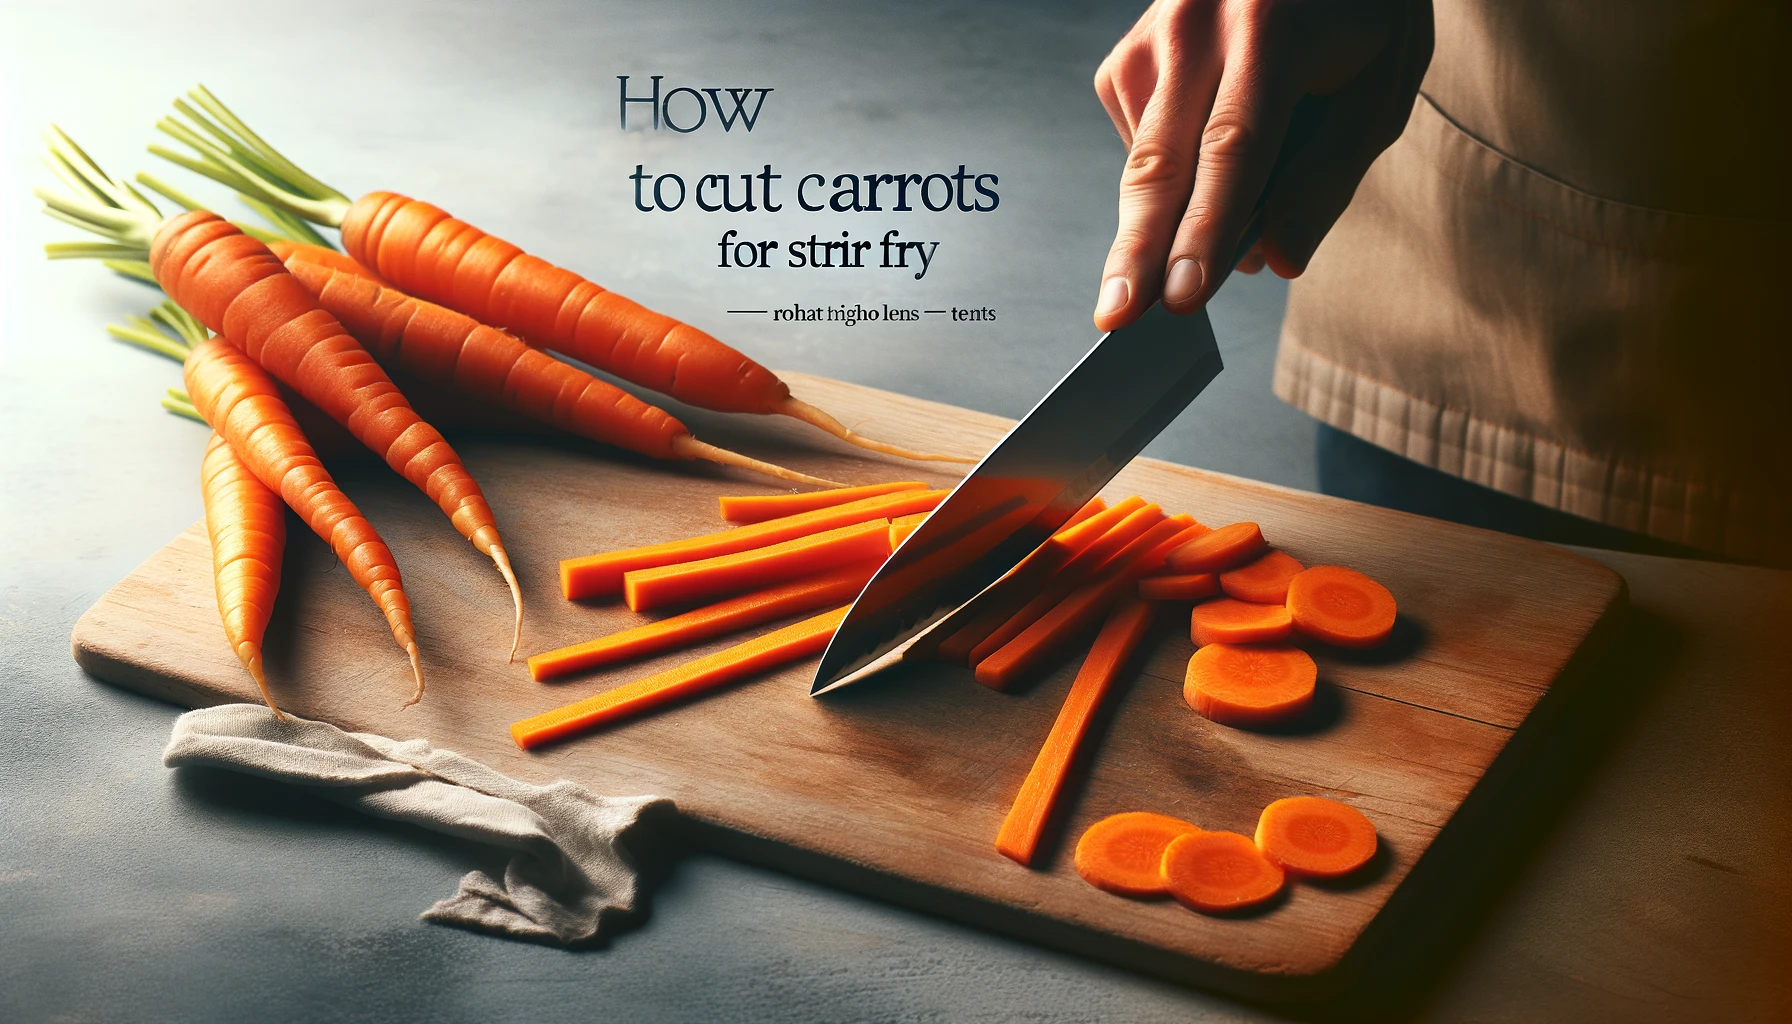 How to Cut Carrots for Stir Fry